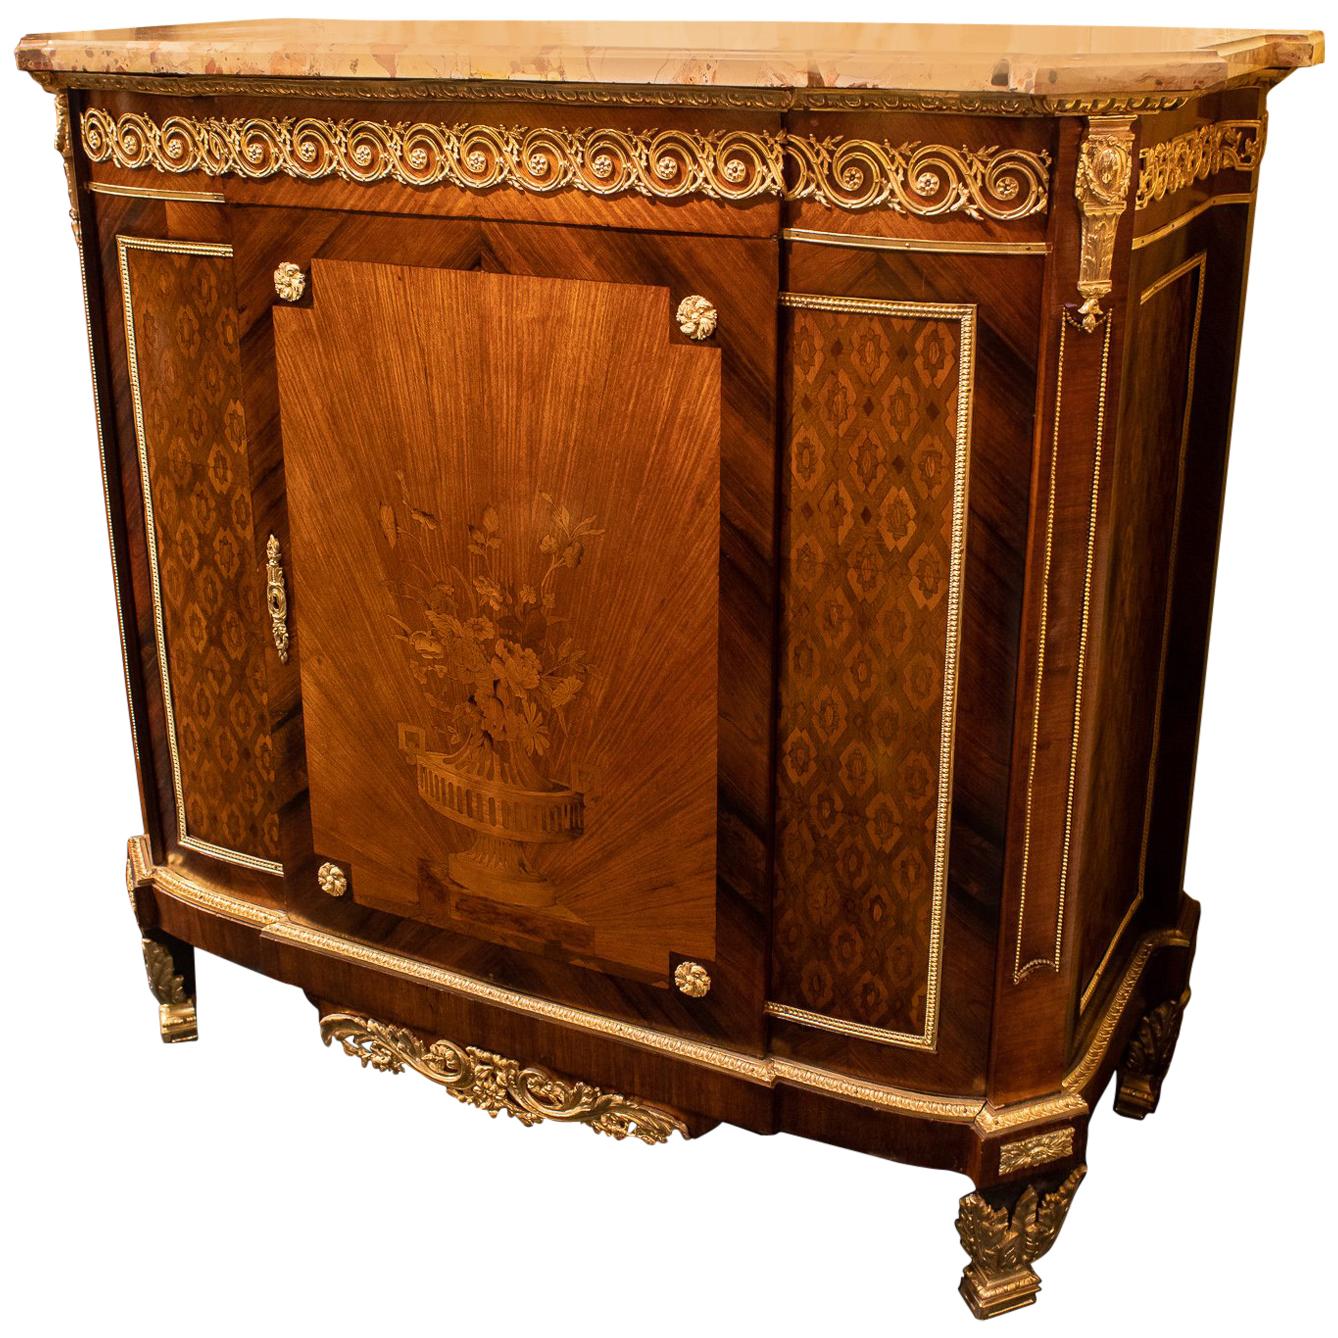 French Louis XVI Style Marquetry Inlaid Bronze-Mounted Marble-Top Commode